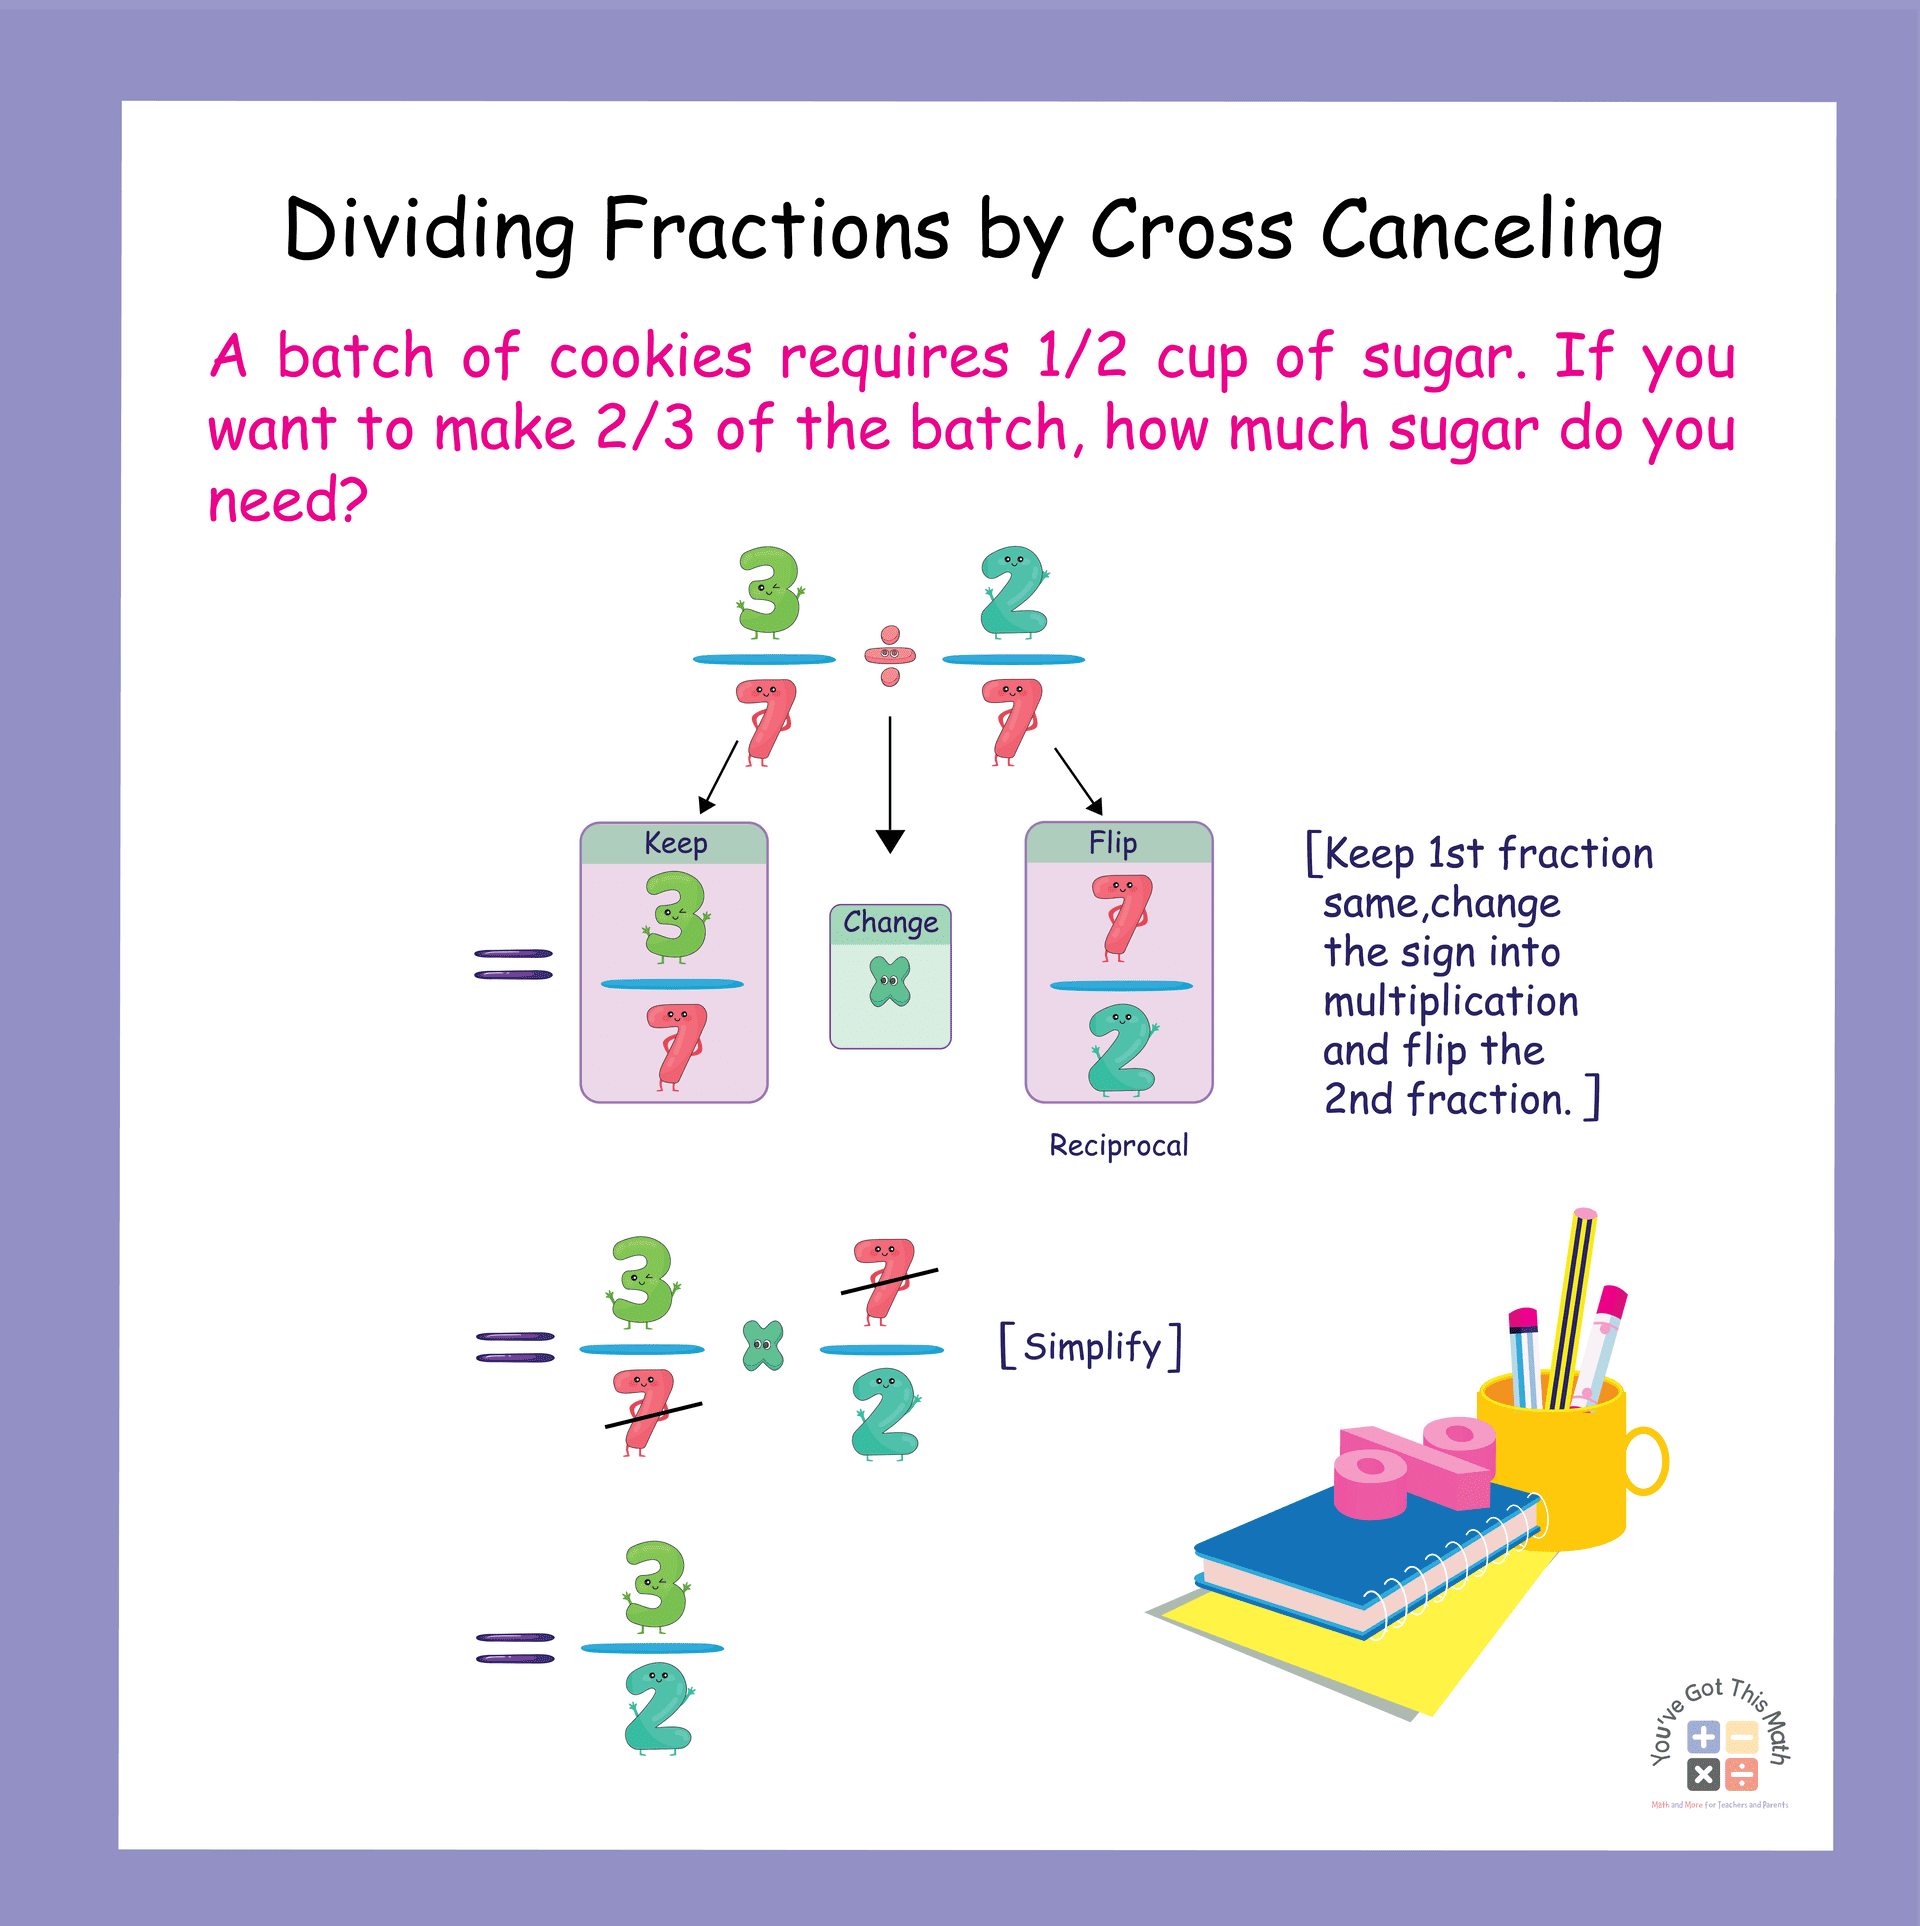 Dividing Fractions by Cross Canceling